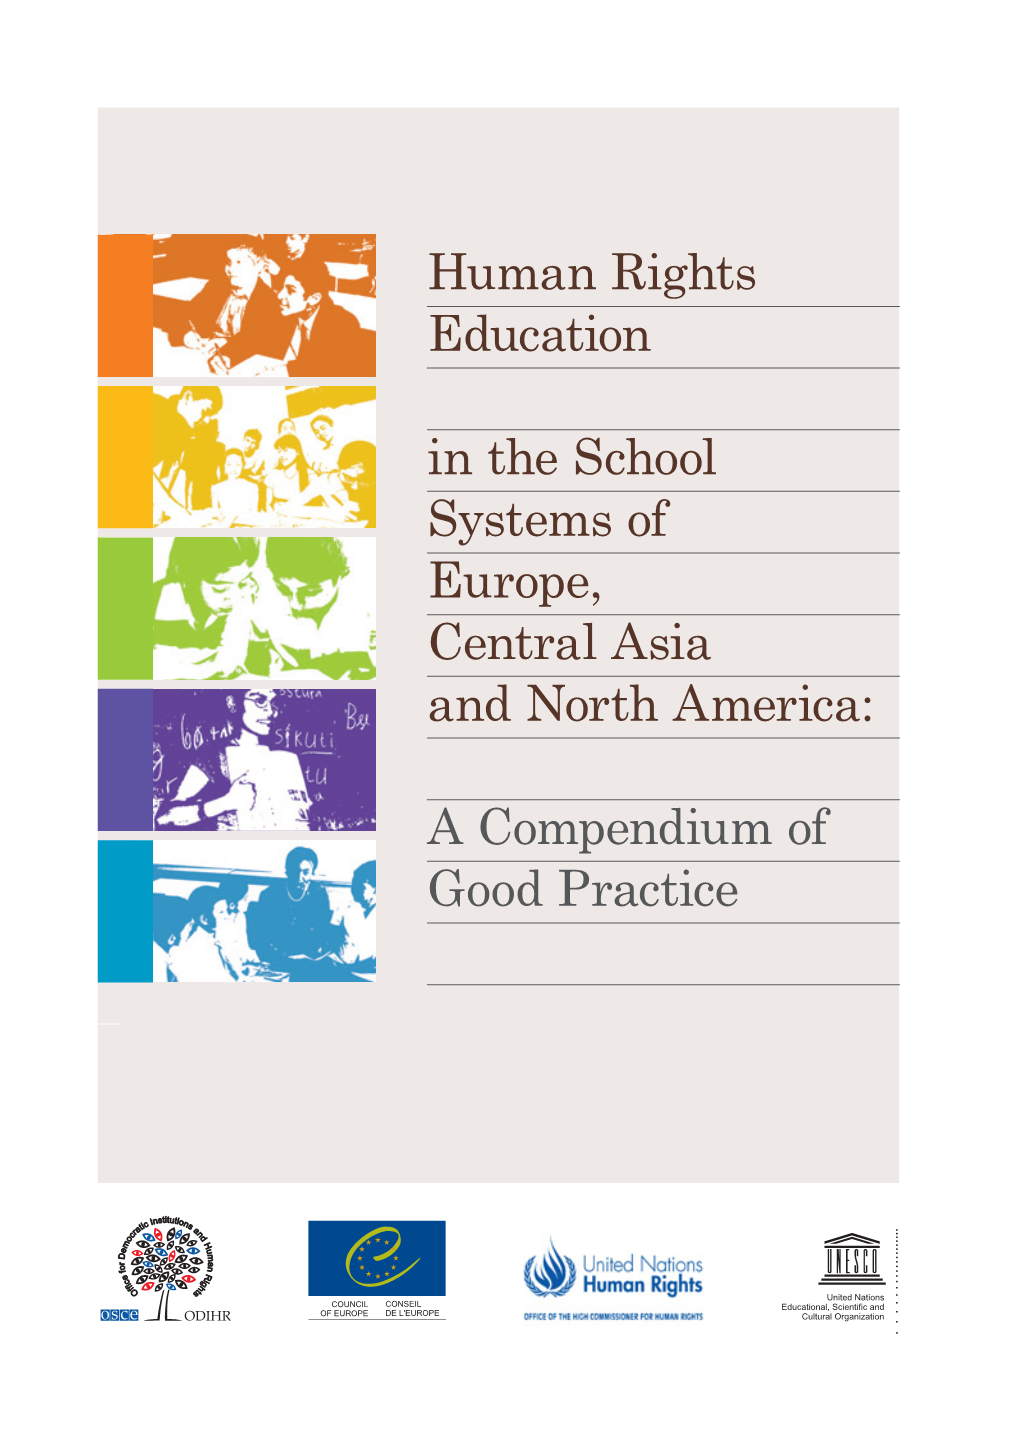 Human Rights Education in the School Systems of Europe, Central Asia and North America